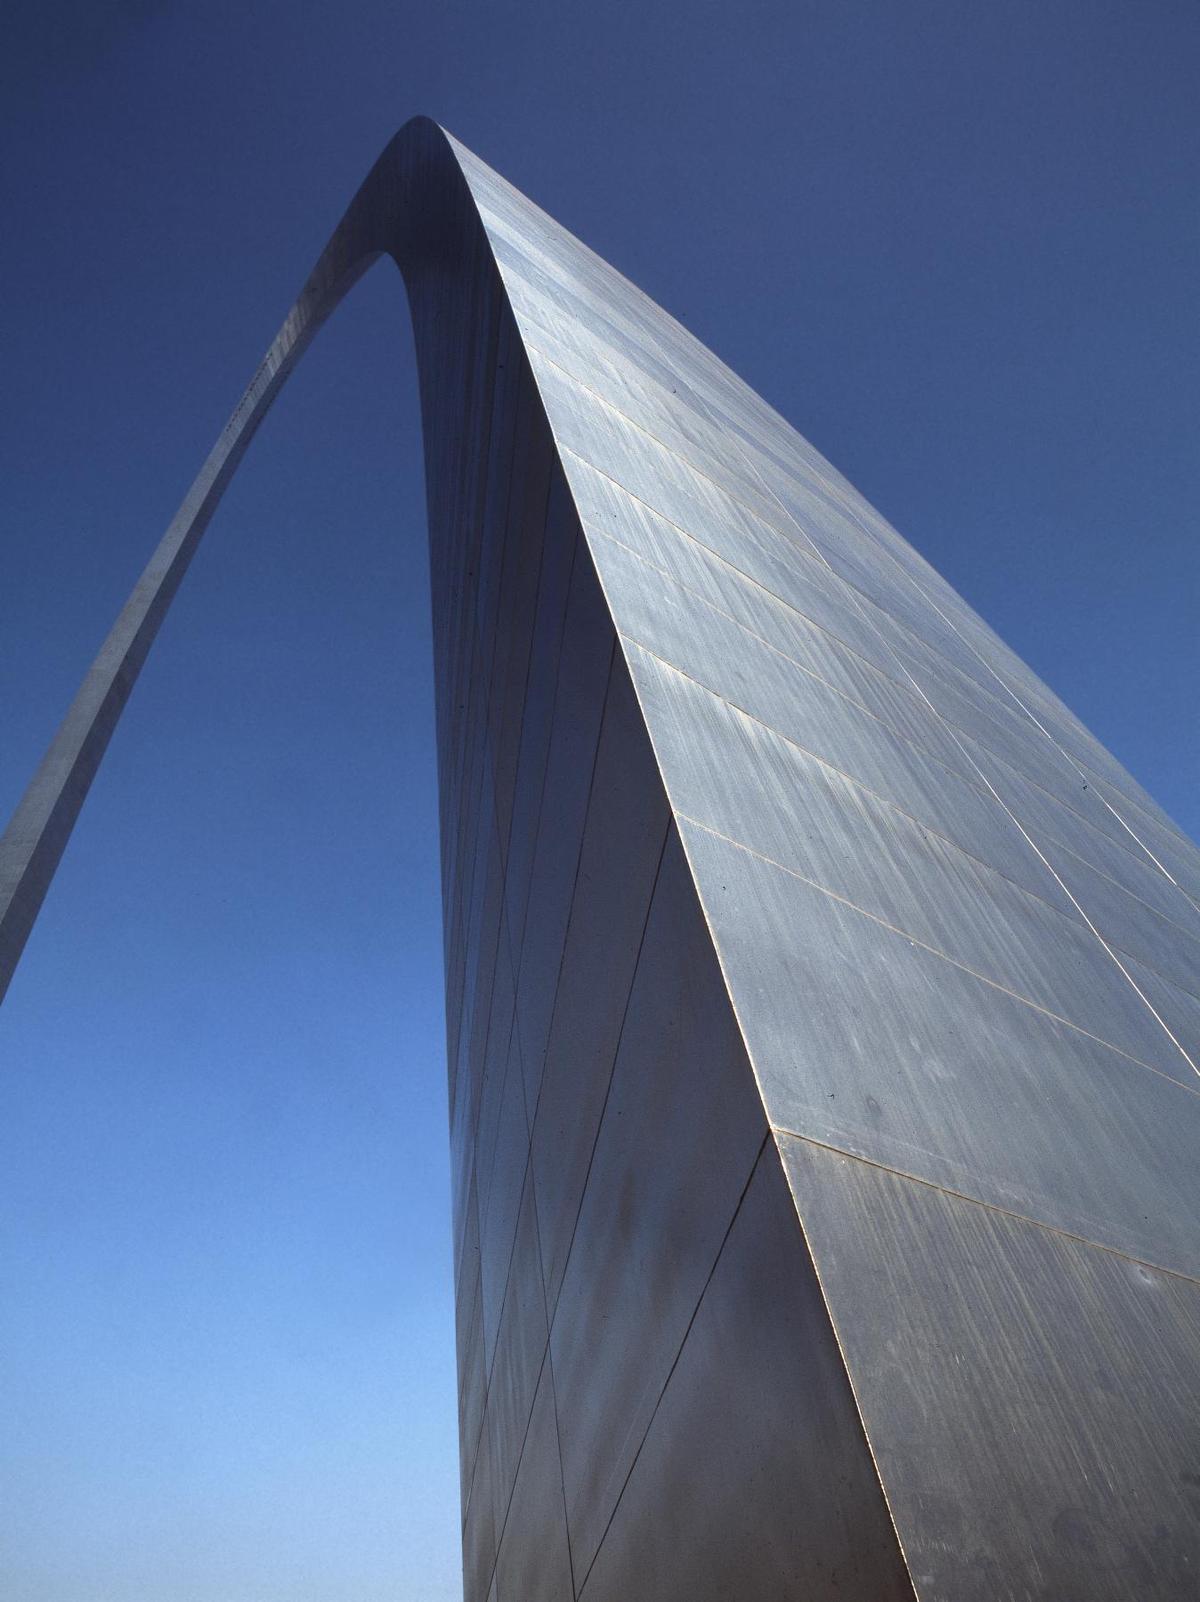 Close-up view of the Gateway Arch. Library of Congress. (Public Domain)